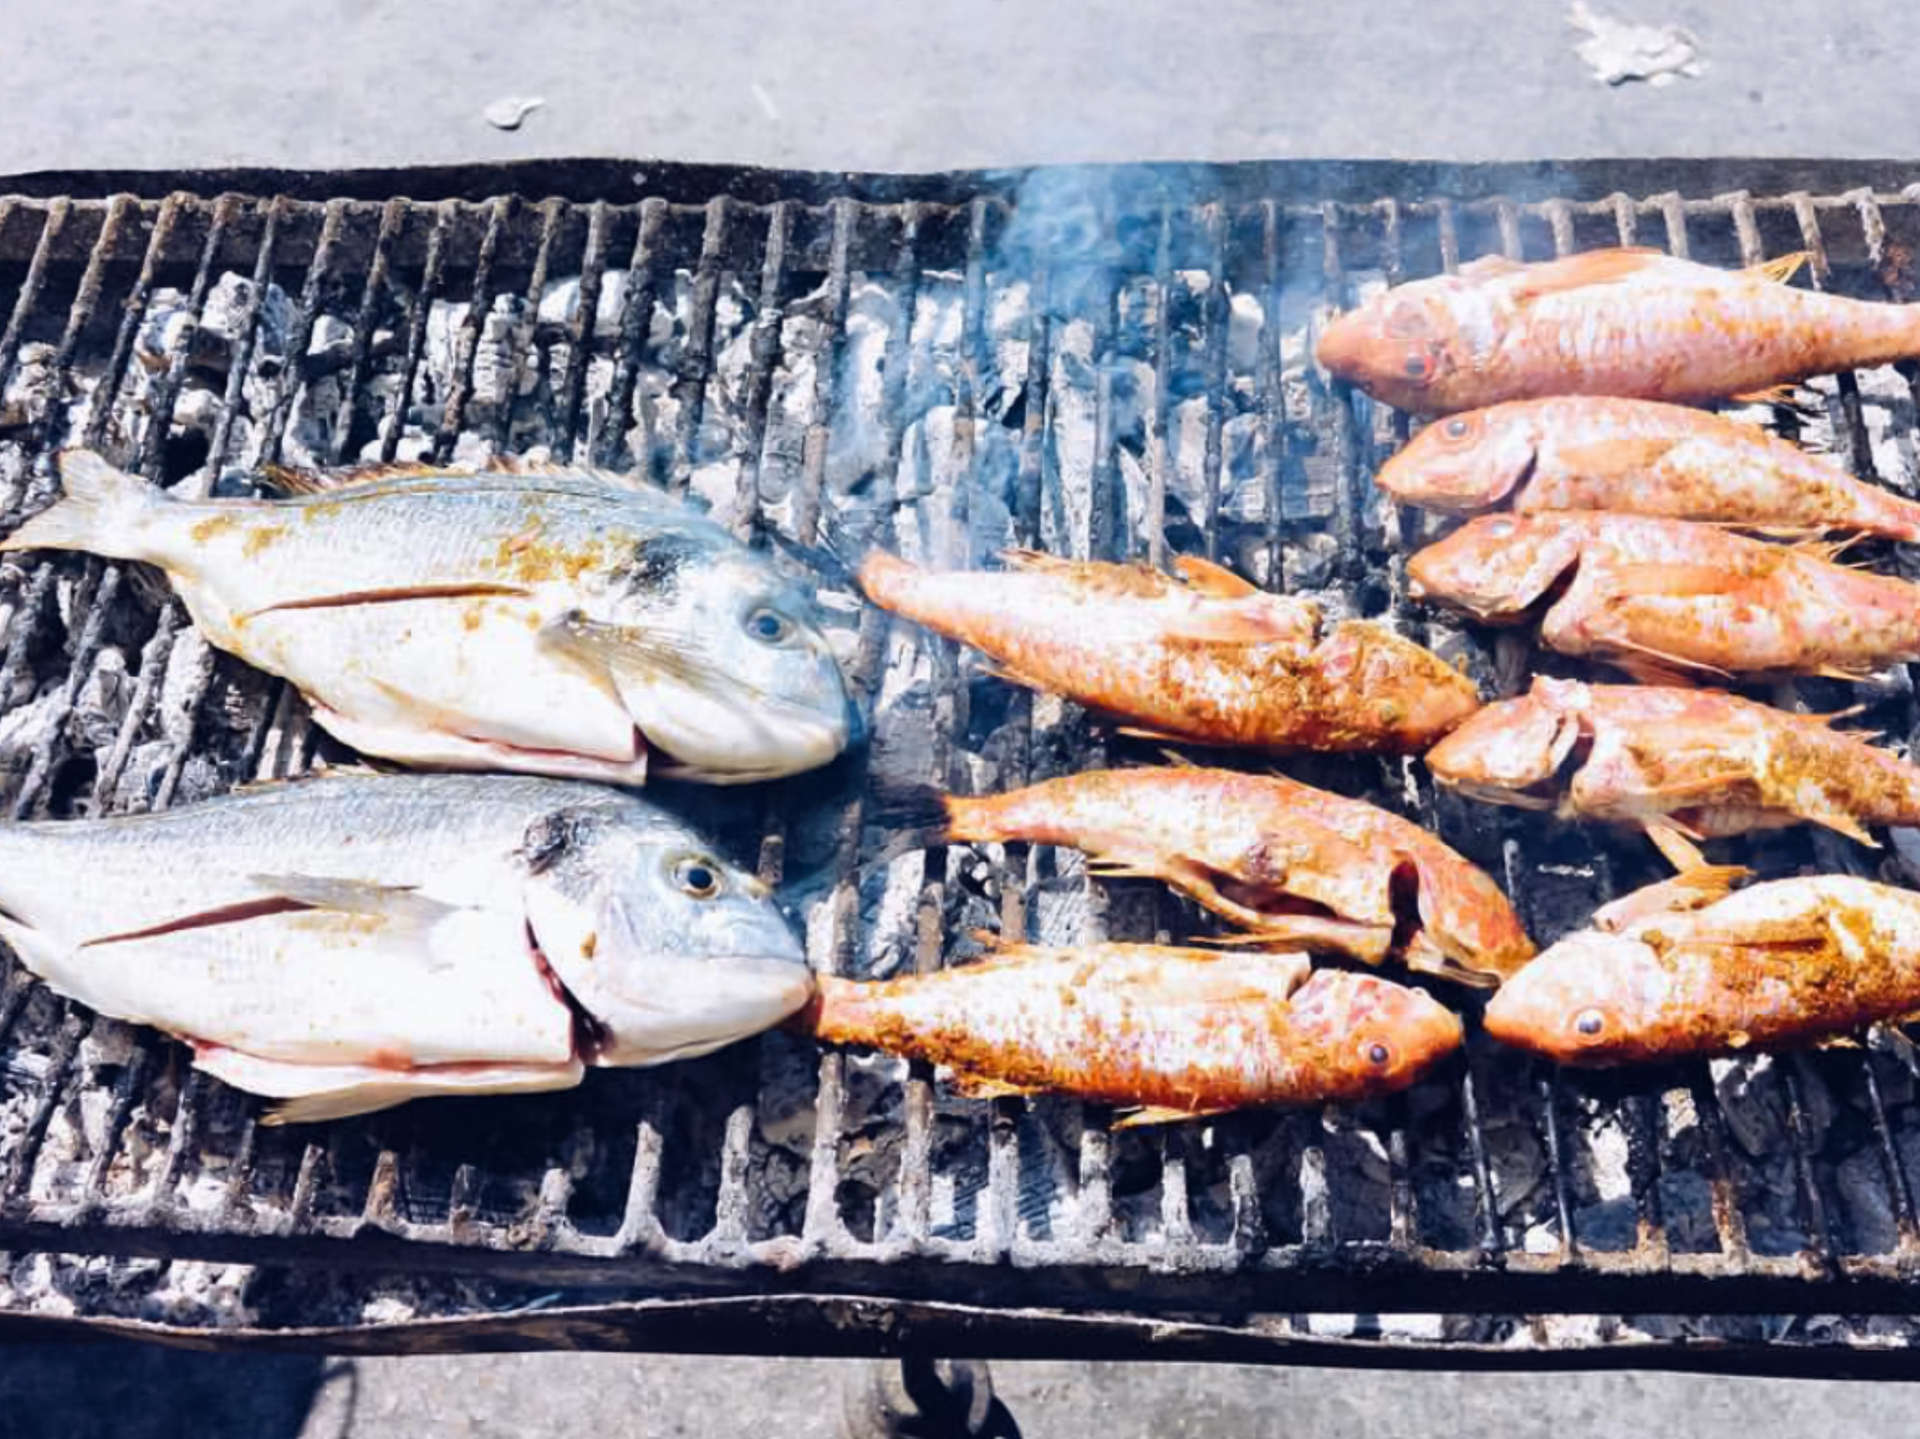 Grilled fish